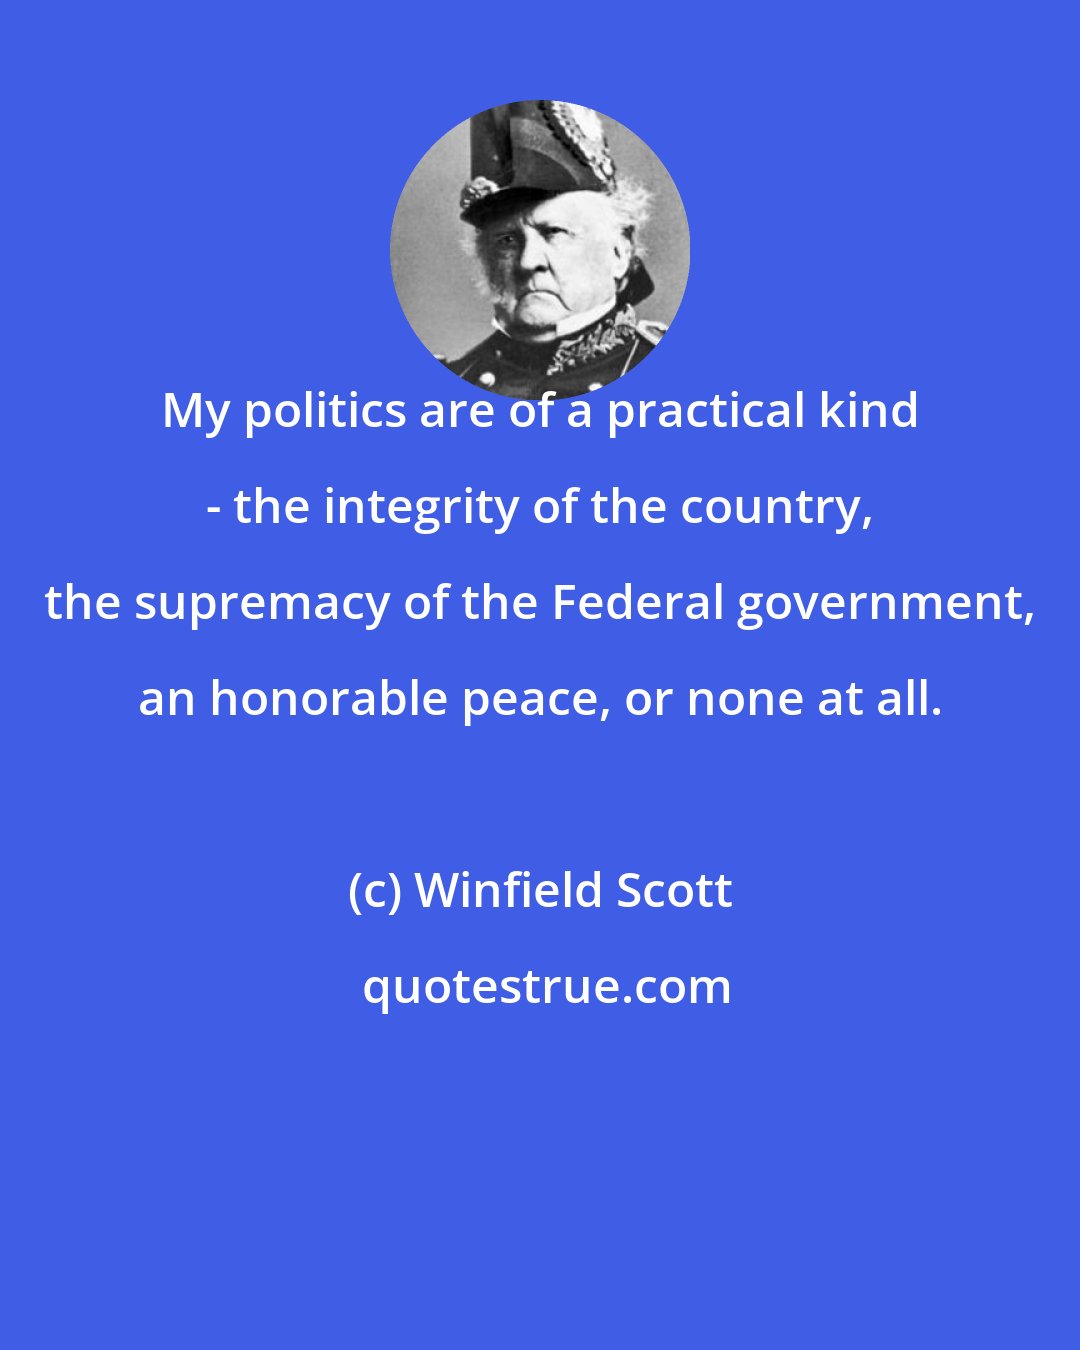 Winfield Scott: My politics are of a practical kind - the integrity of the country, the supremacy of the Federal government, an honorable peace, or none at all.